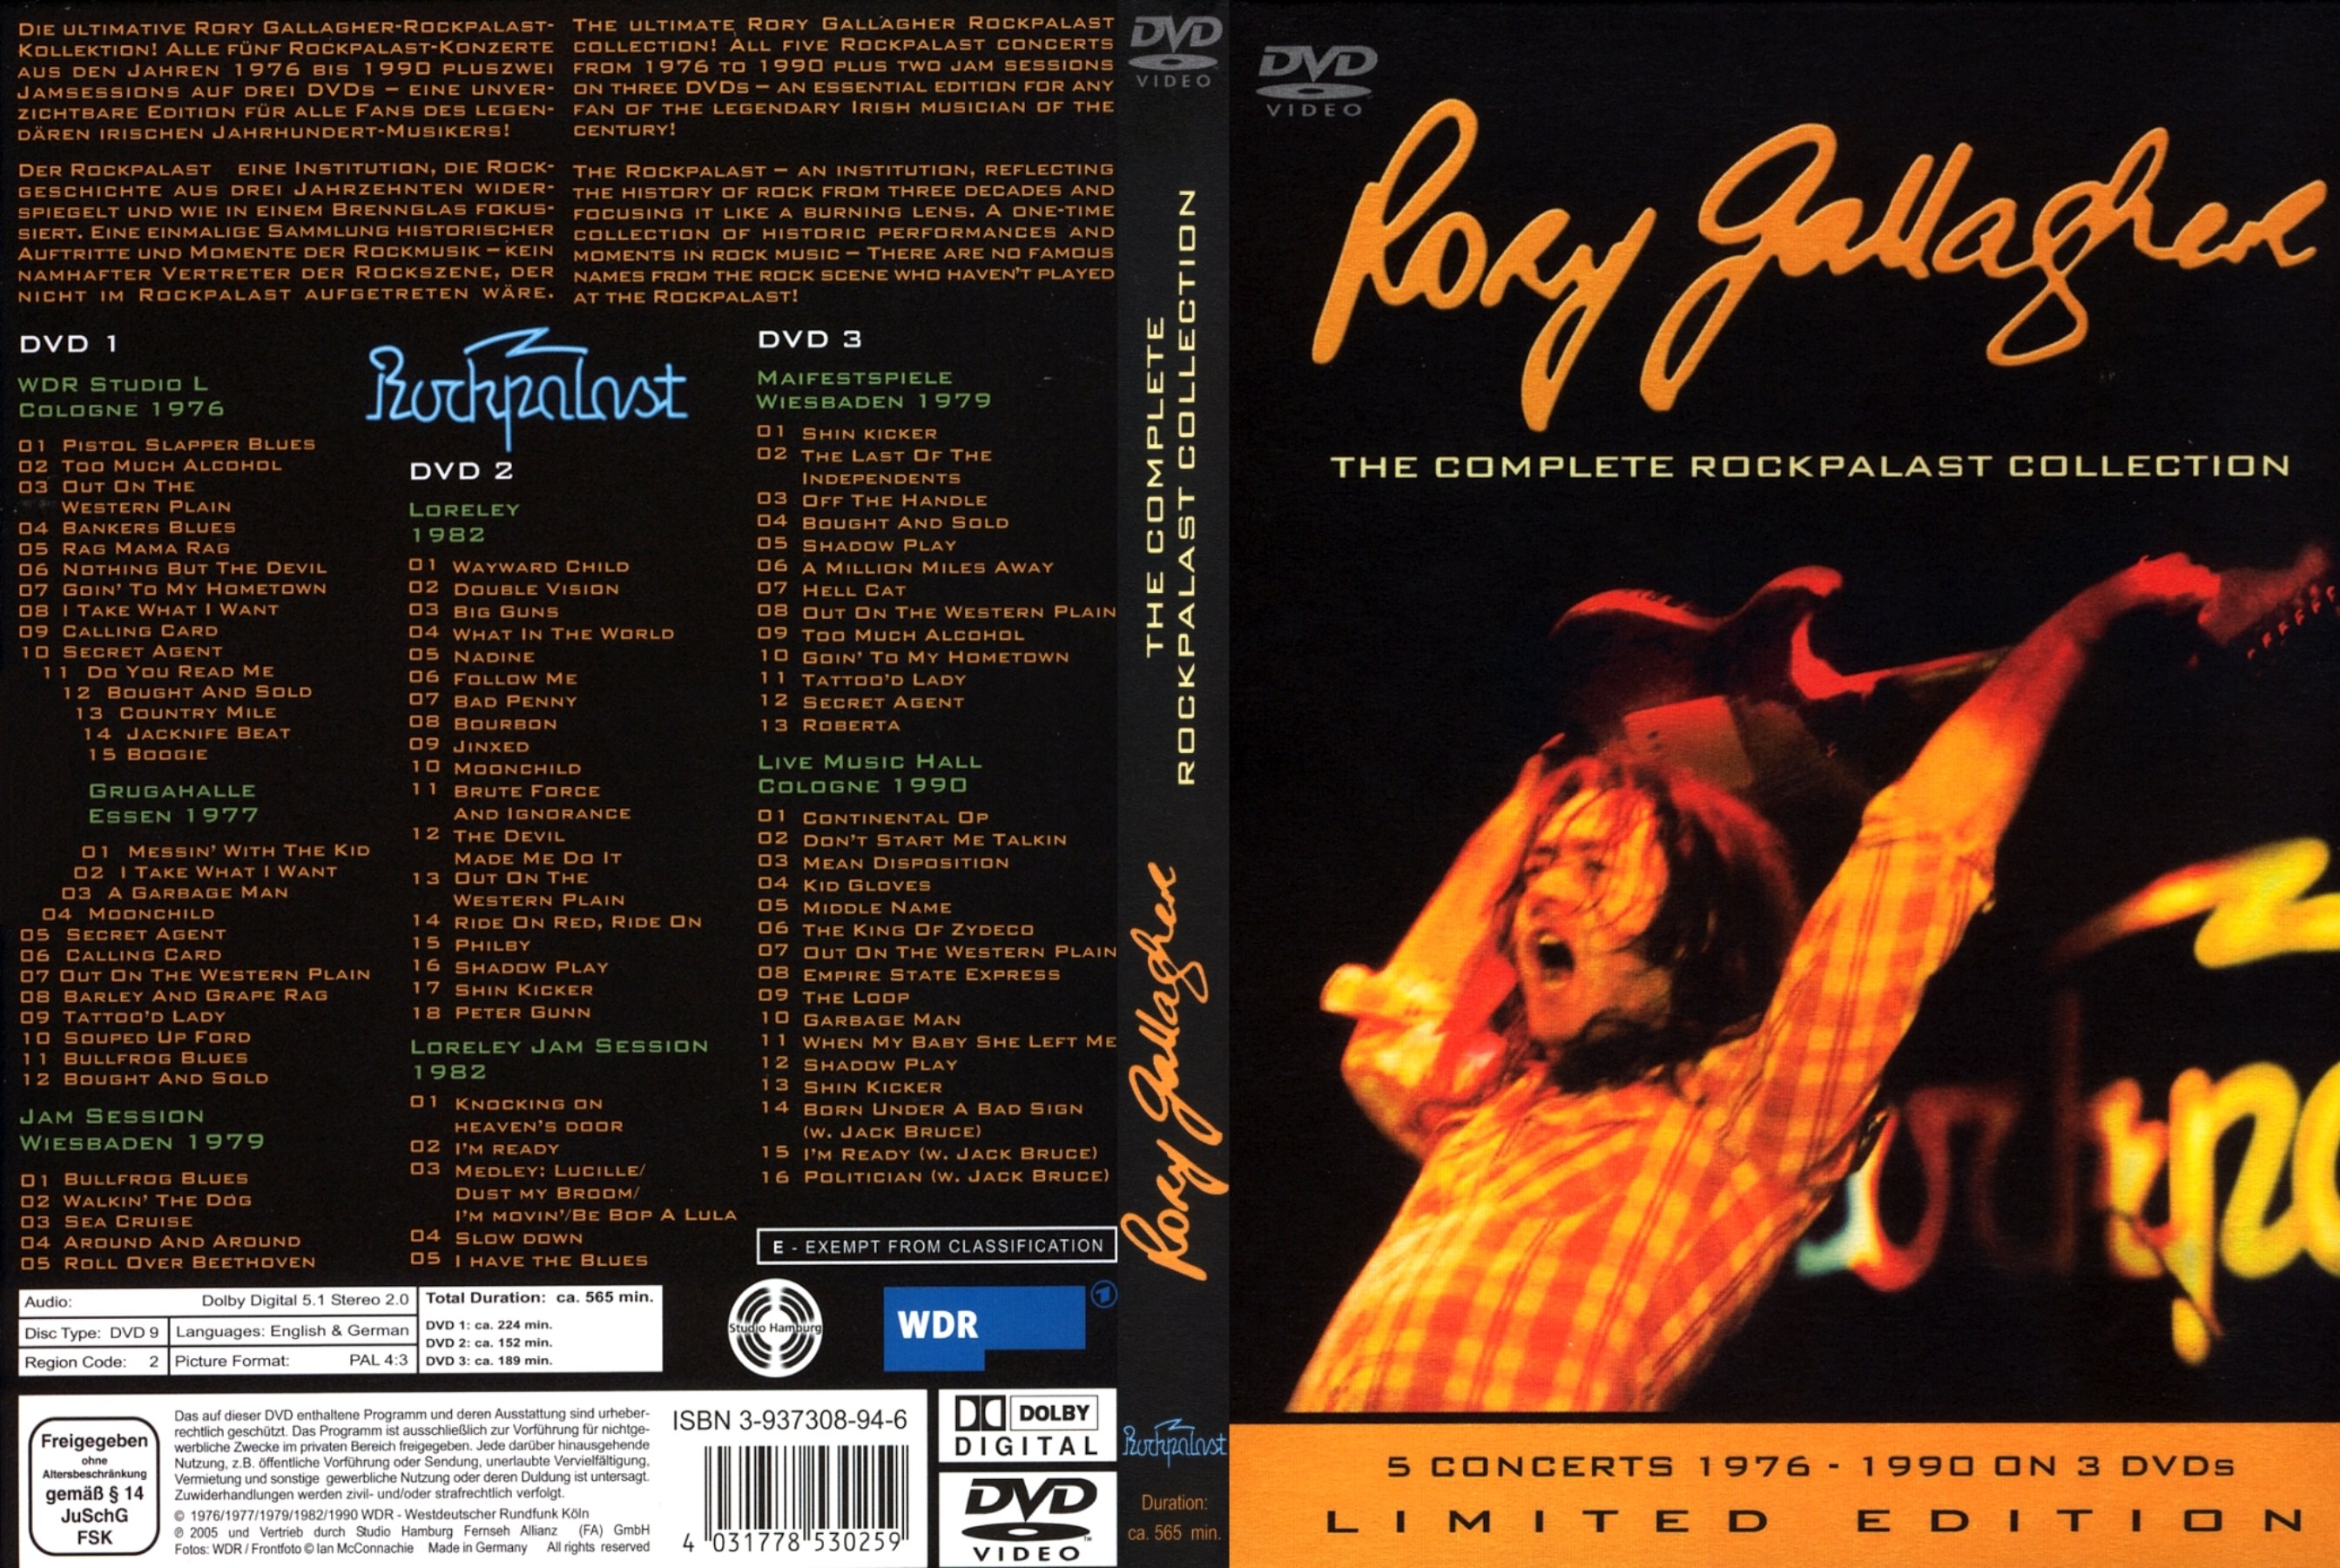 Jaquette DVD Rory Gallagher - The complete Rockpalast Collection